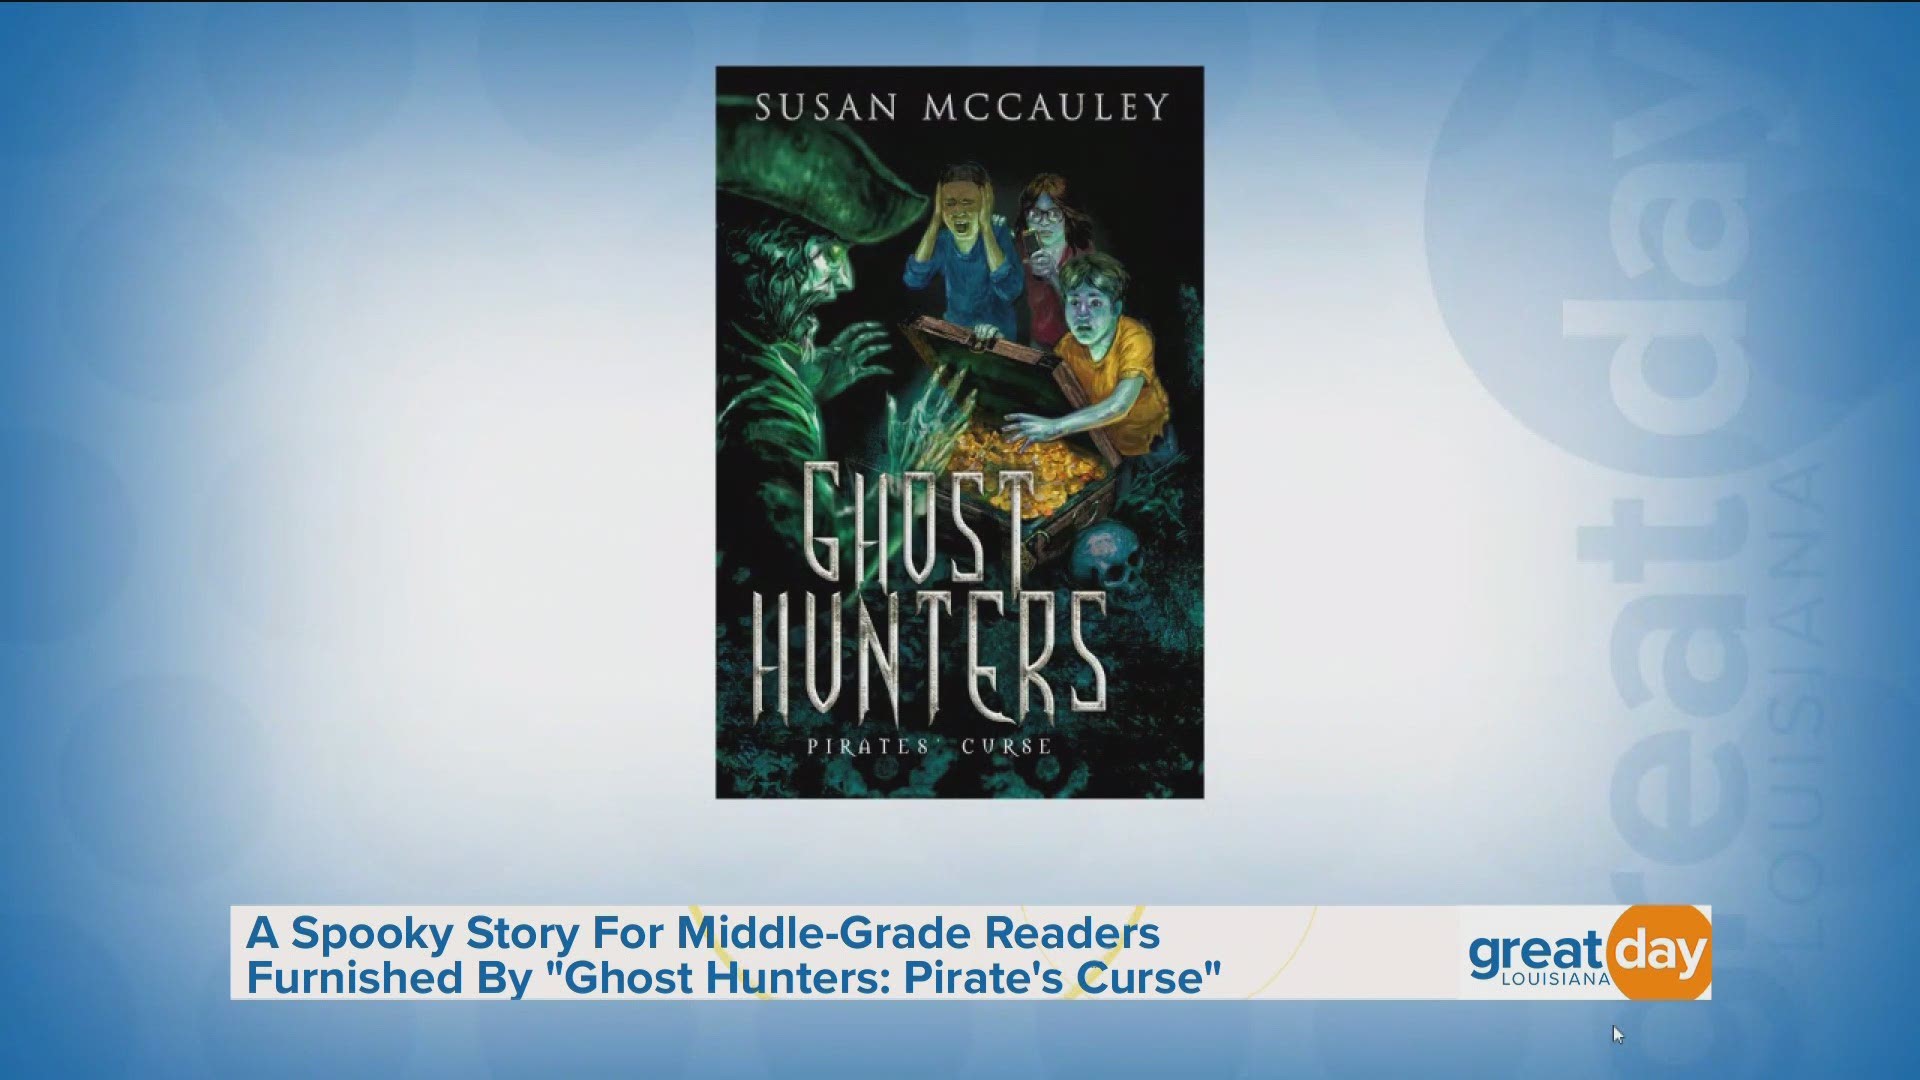 The author of "Ghost Hunters: Pirate's Curse" discussed her latest book which is set in New Orleans.